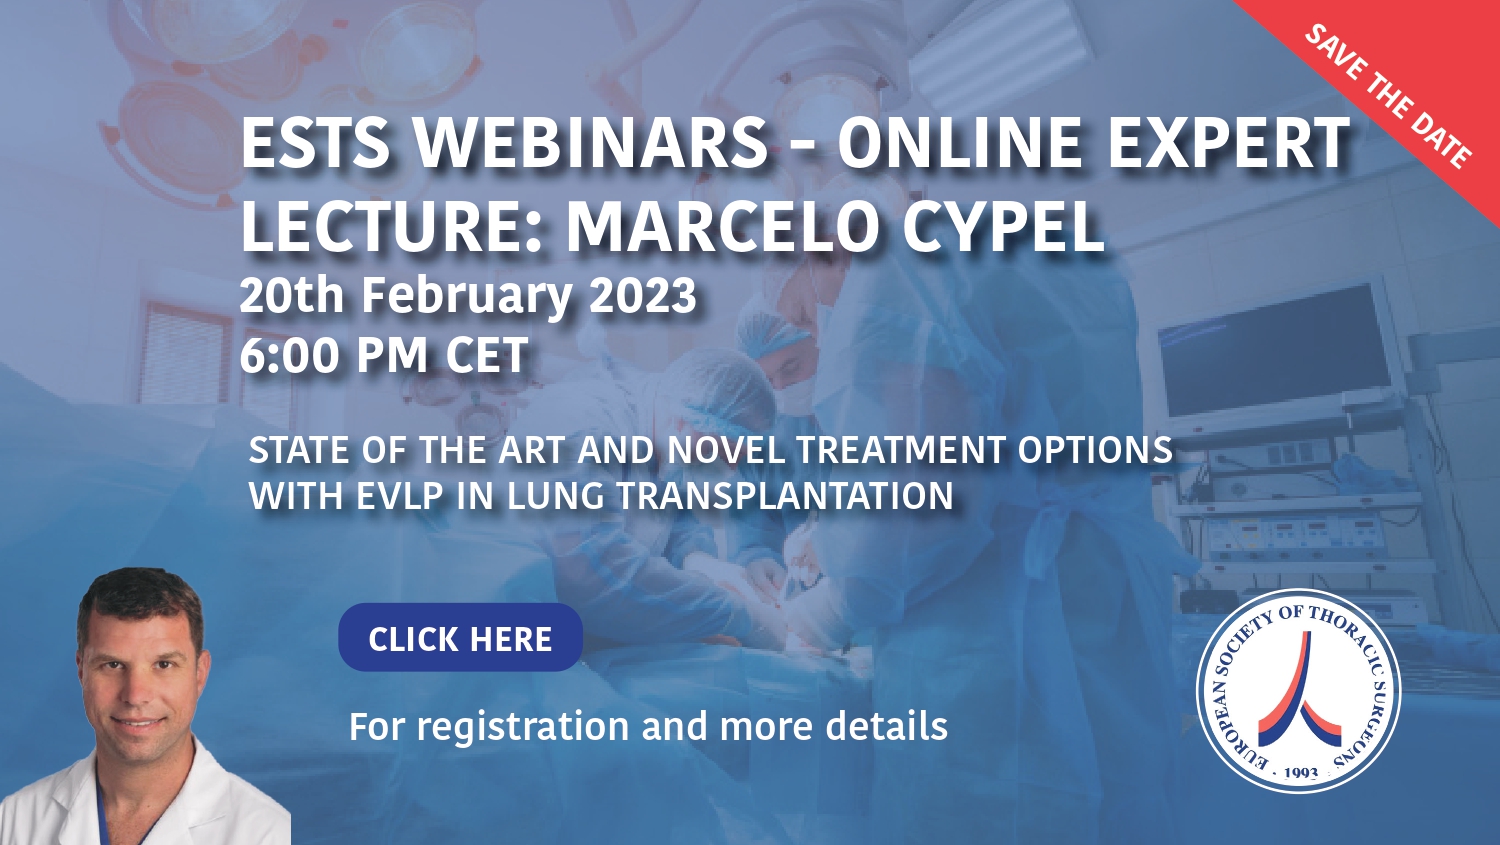 ESTS Webinar: Online Expert Lecture: State of the Art and Novel Treatment Options with EVLP in Lung Transplantation image